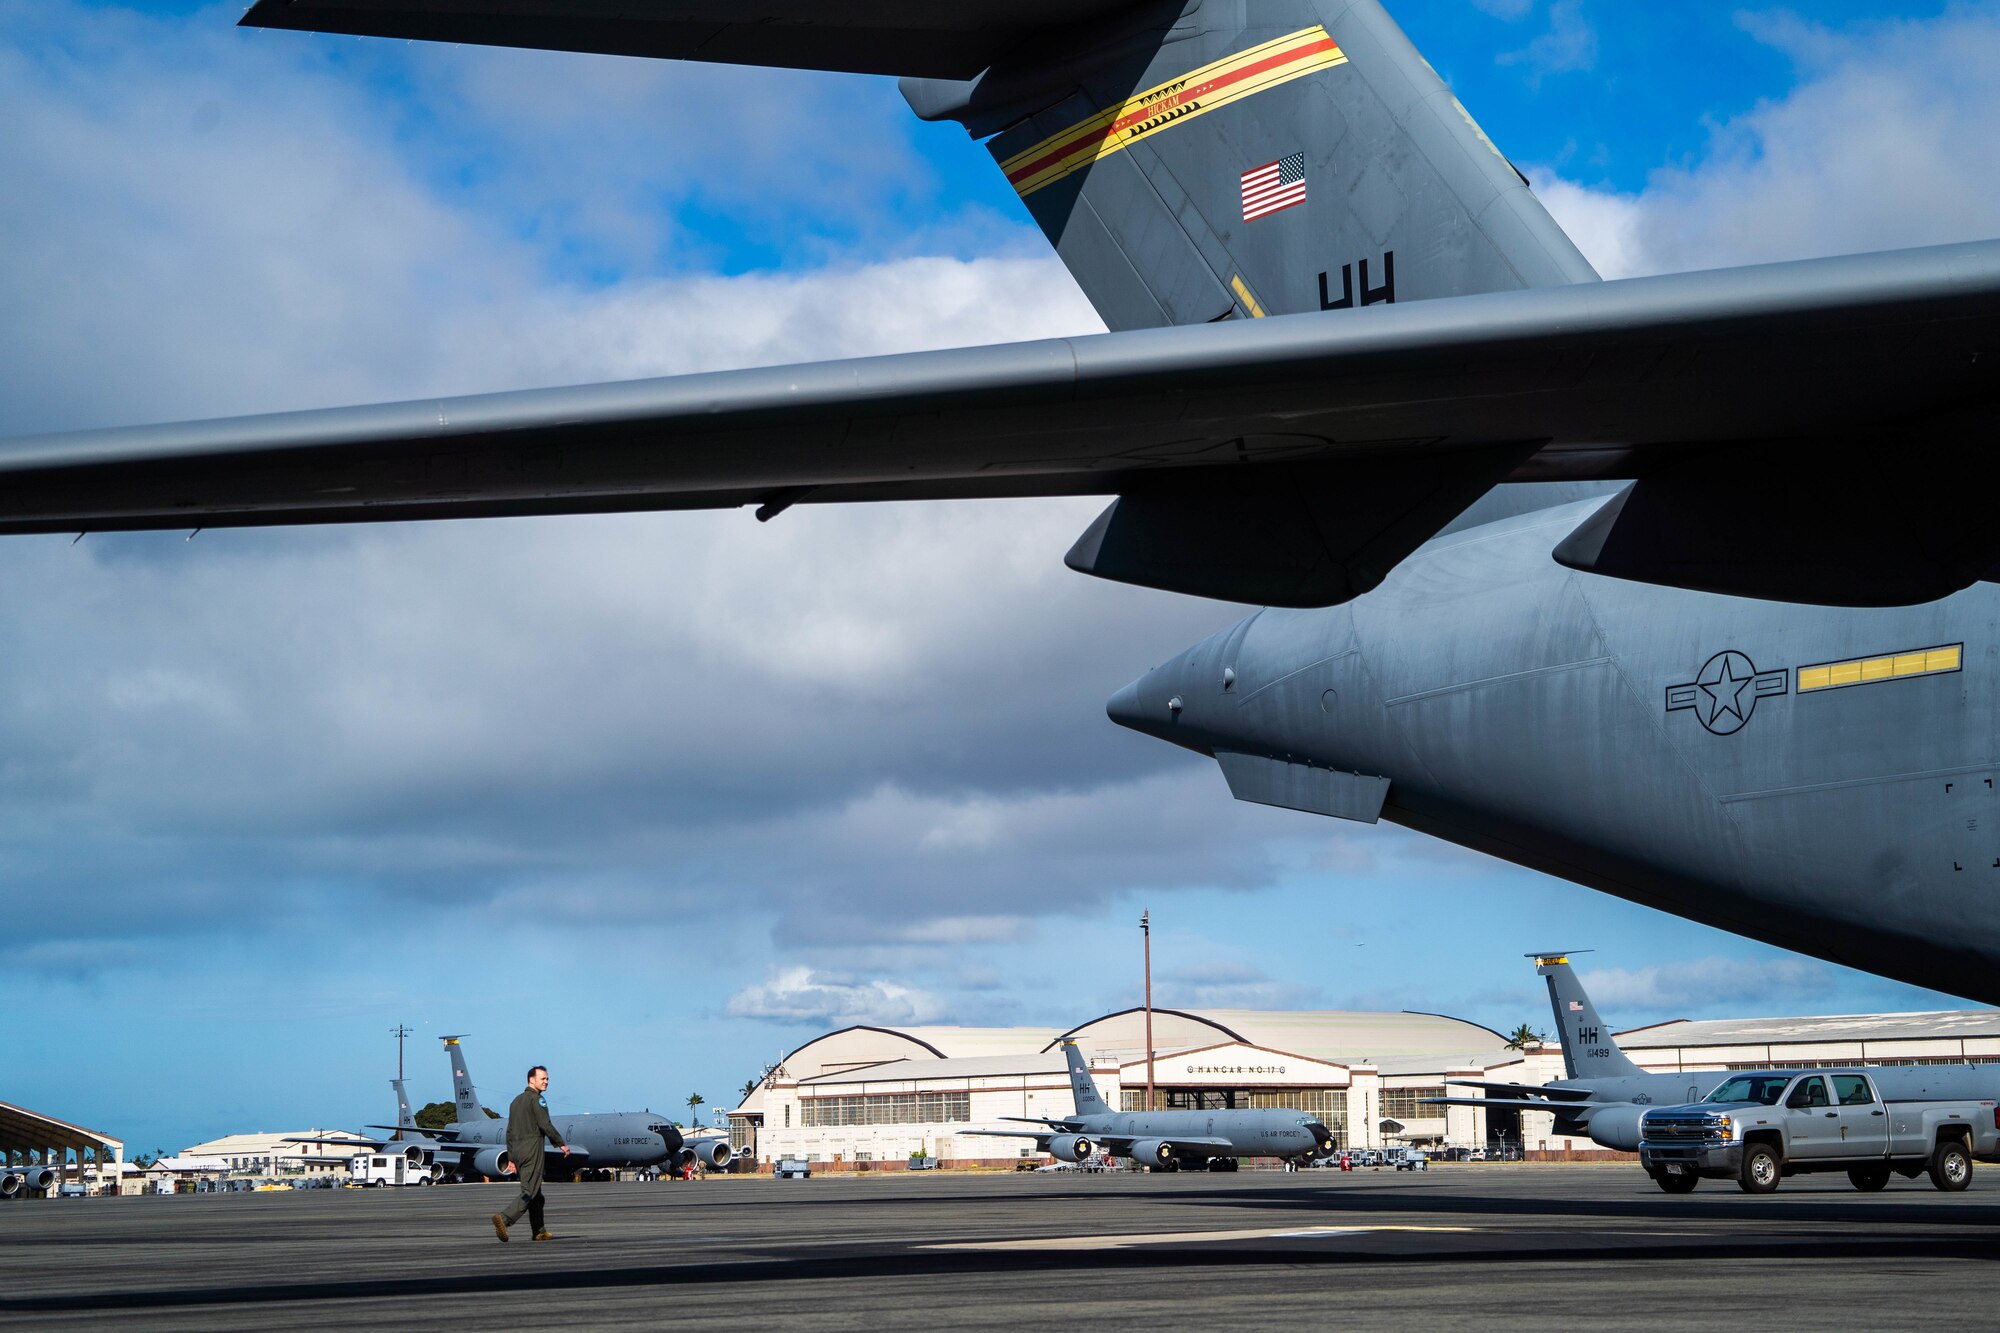 U.S. Air Force Maj. Joshua Moore, 535th Airlift Squadron pilot, performs a pre-flight inspection around the exterior of a C-17 Globemaster III before takeoff during Exercise Global Dexterity 2022 at Joint Base Pearl Harbor-Hickam, Hawaii, May 4, 2022. Exercise Global Dexterity is designed to prepare the U.S. Air Force and the Royal Australian Air Force for combined action in wartime, peacetime, and humanitarian operations throughout the Indo-Pacific. (U.S. Air Force photo by Airman 1st Class Makensie Cooper)